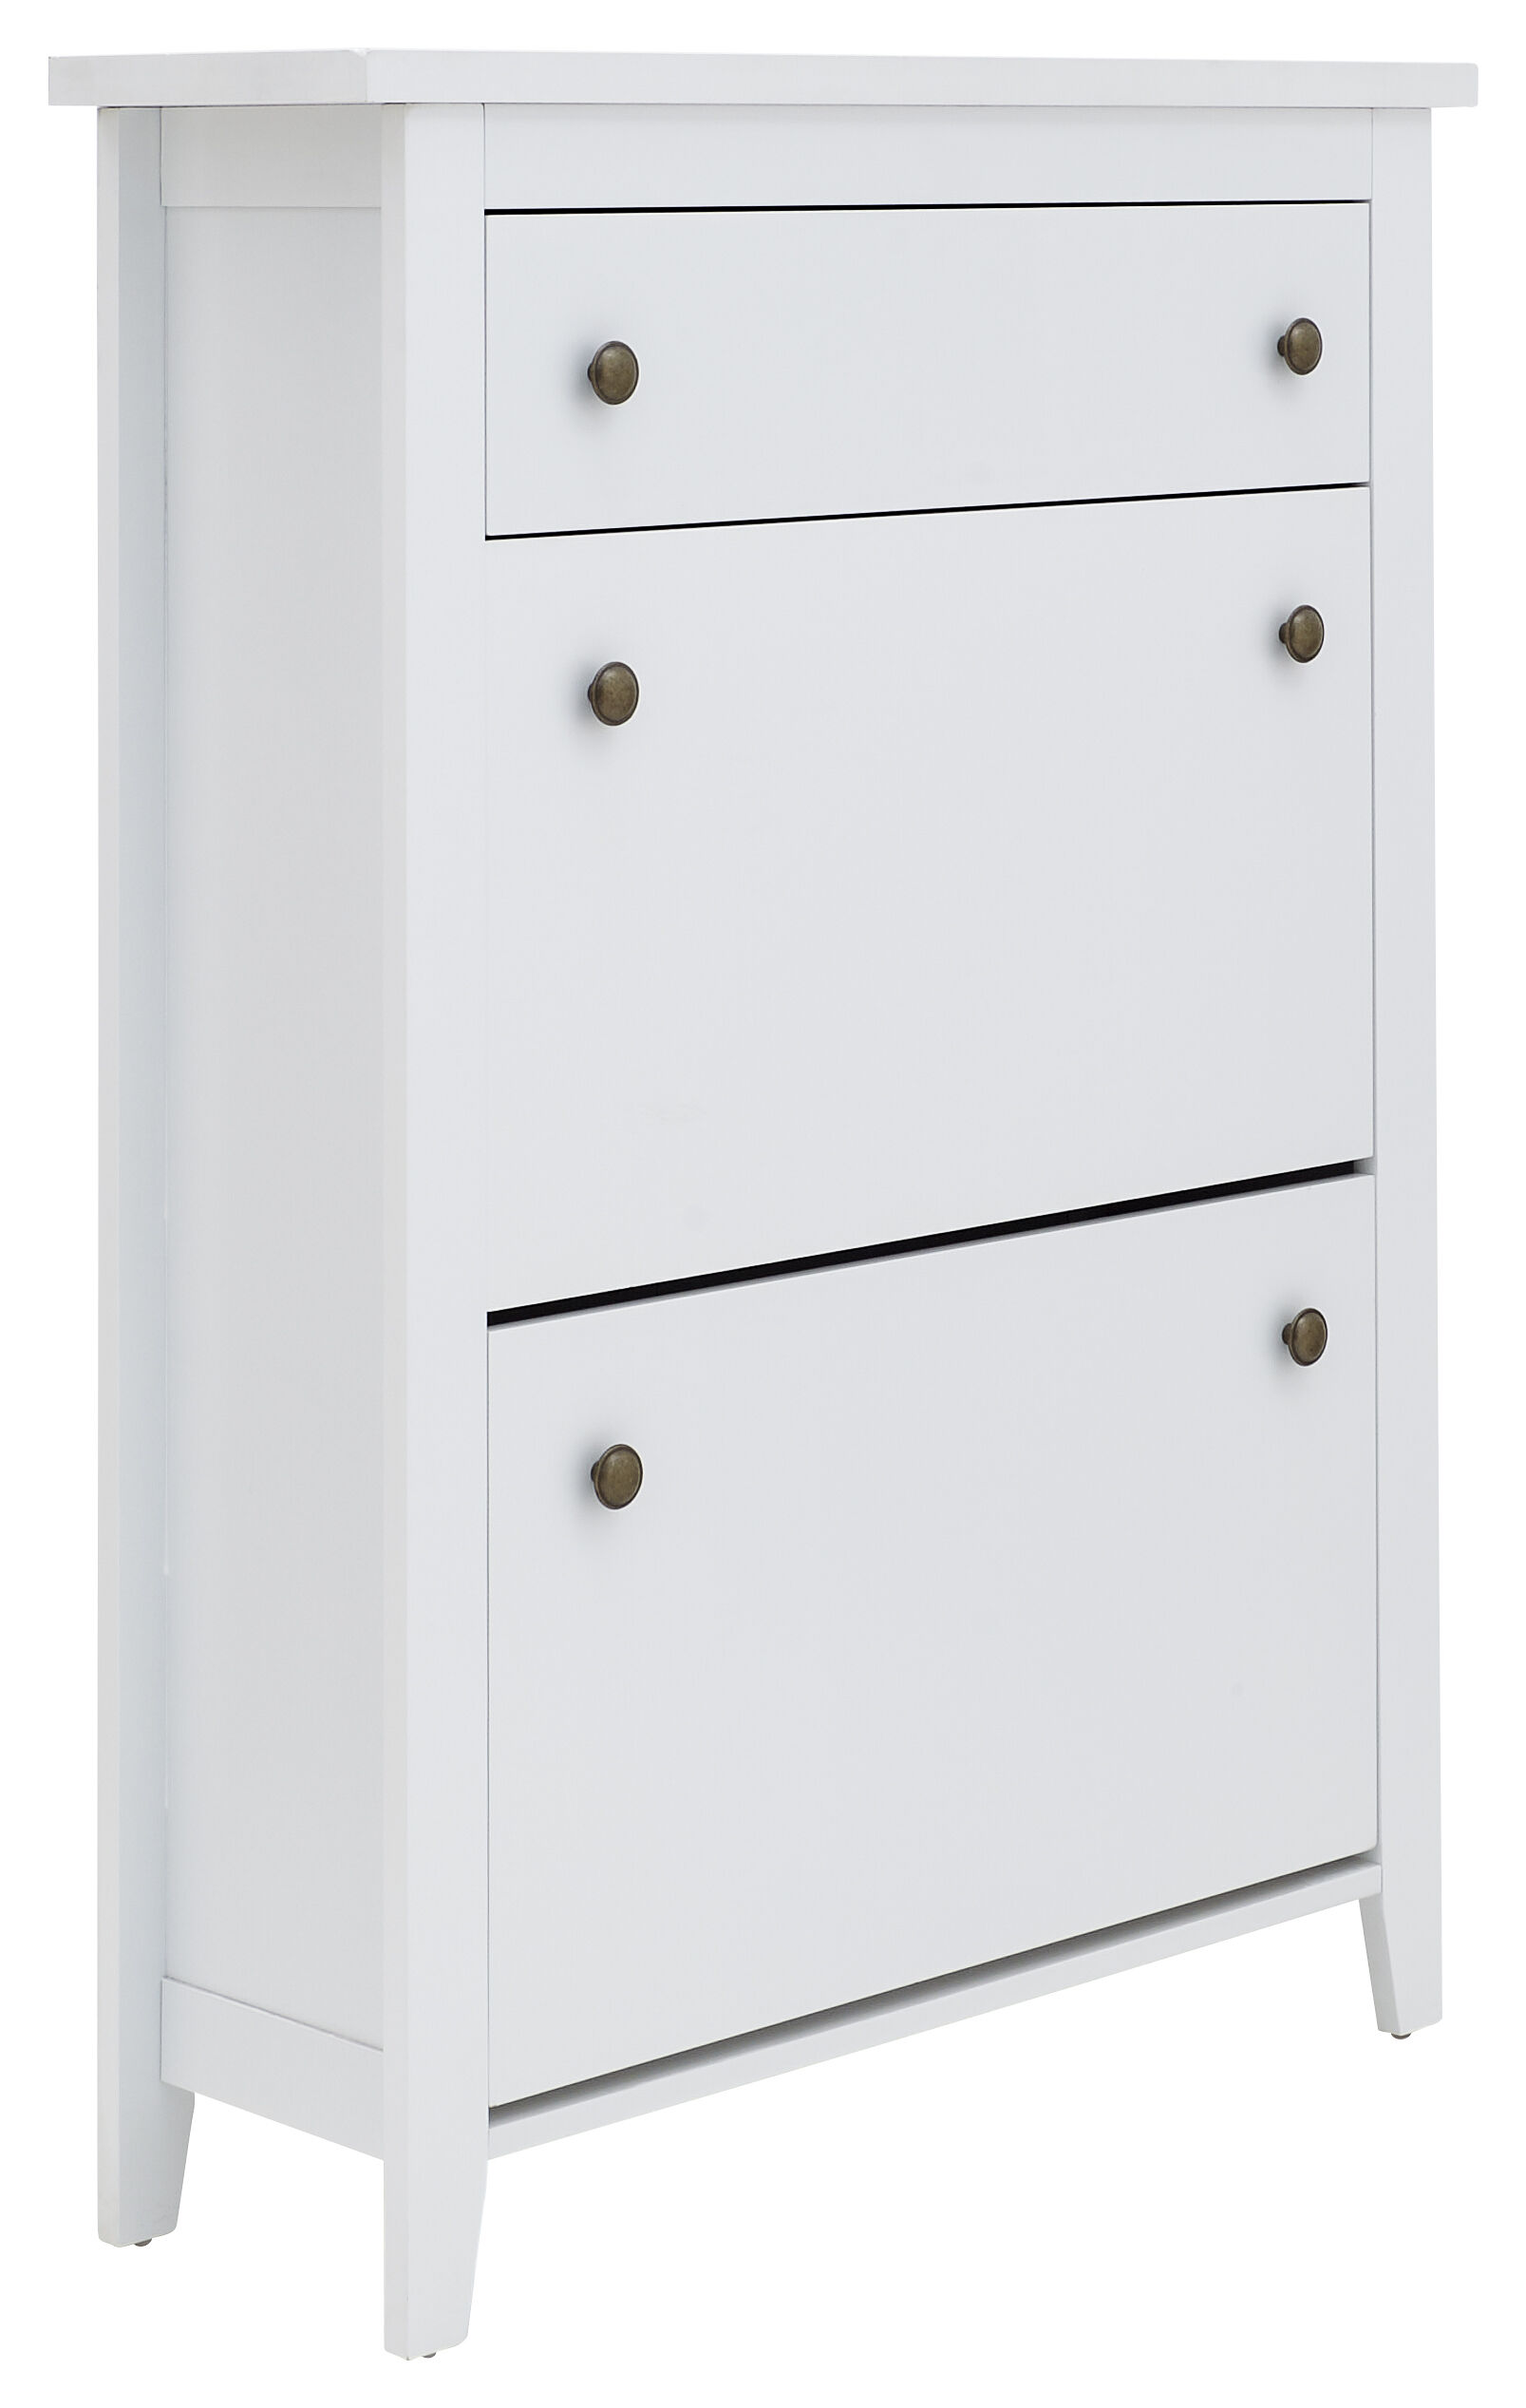 Deluxe Storage & Seating Two Tier Shoe Cabinet   White   Self Assembly